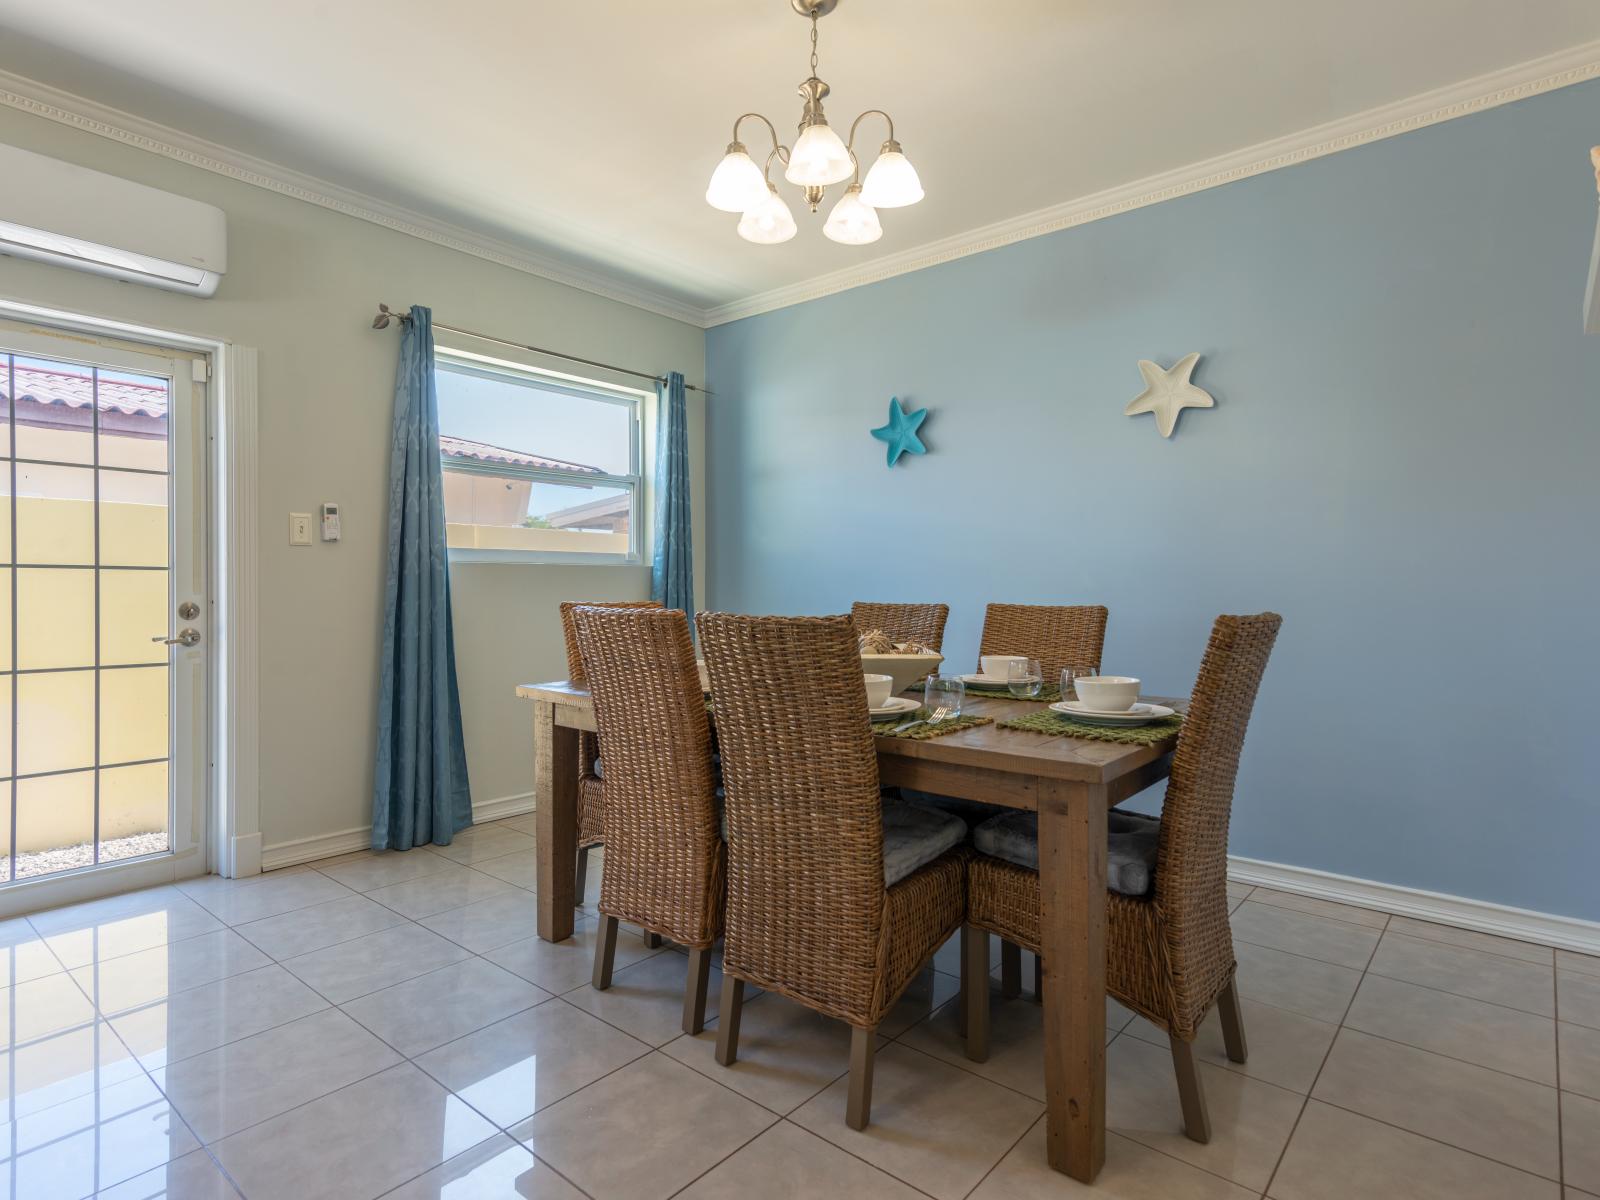 A symphony of taste and elegance awaits at dining area of the home in Noord Aruba - Indulge in culinary delights amidst refined ambiance at this dining table for 6 people - Celebrate togetherness and delicious cuisine in charming space